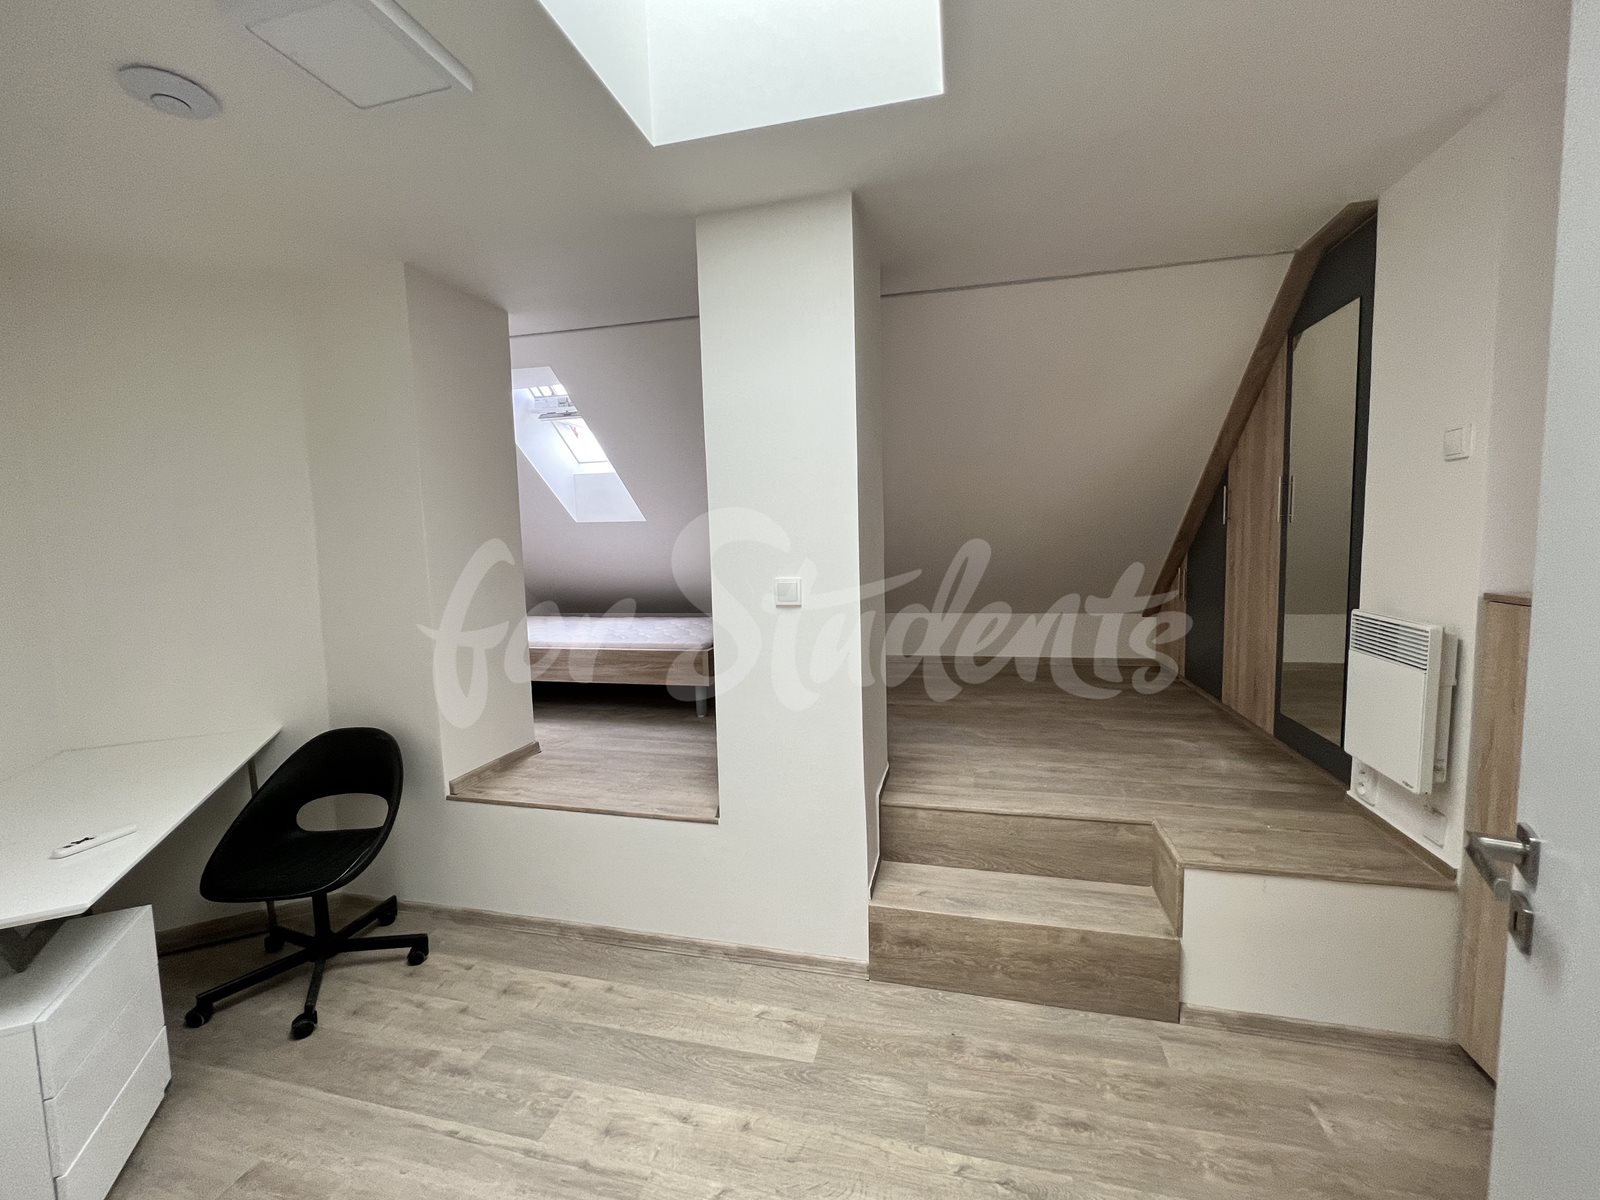 Brand new attic two bedroom apartment in New Town, Hradec Králové